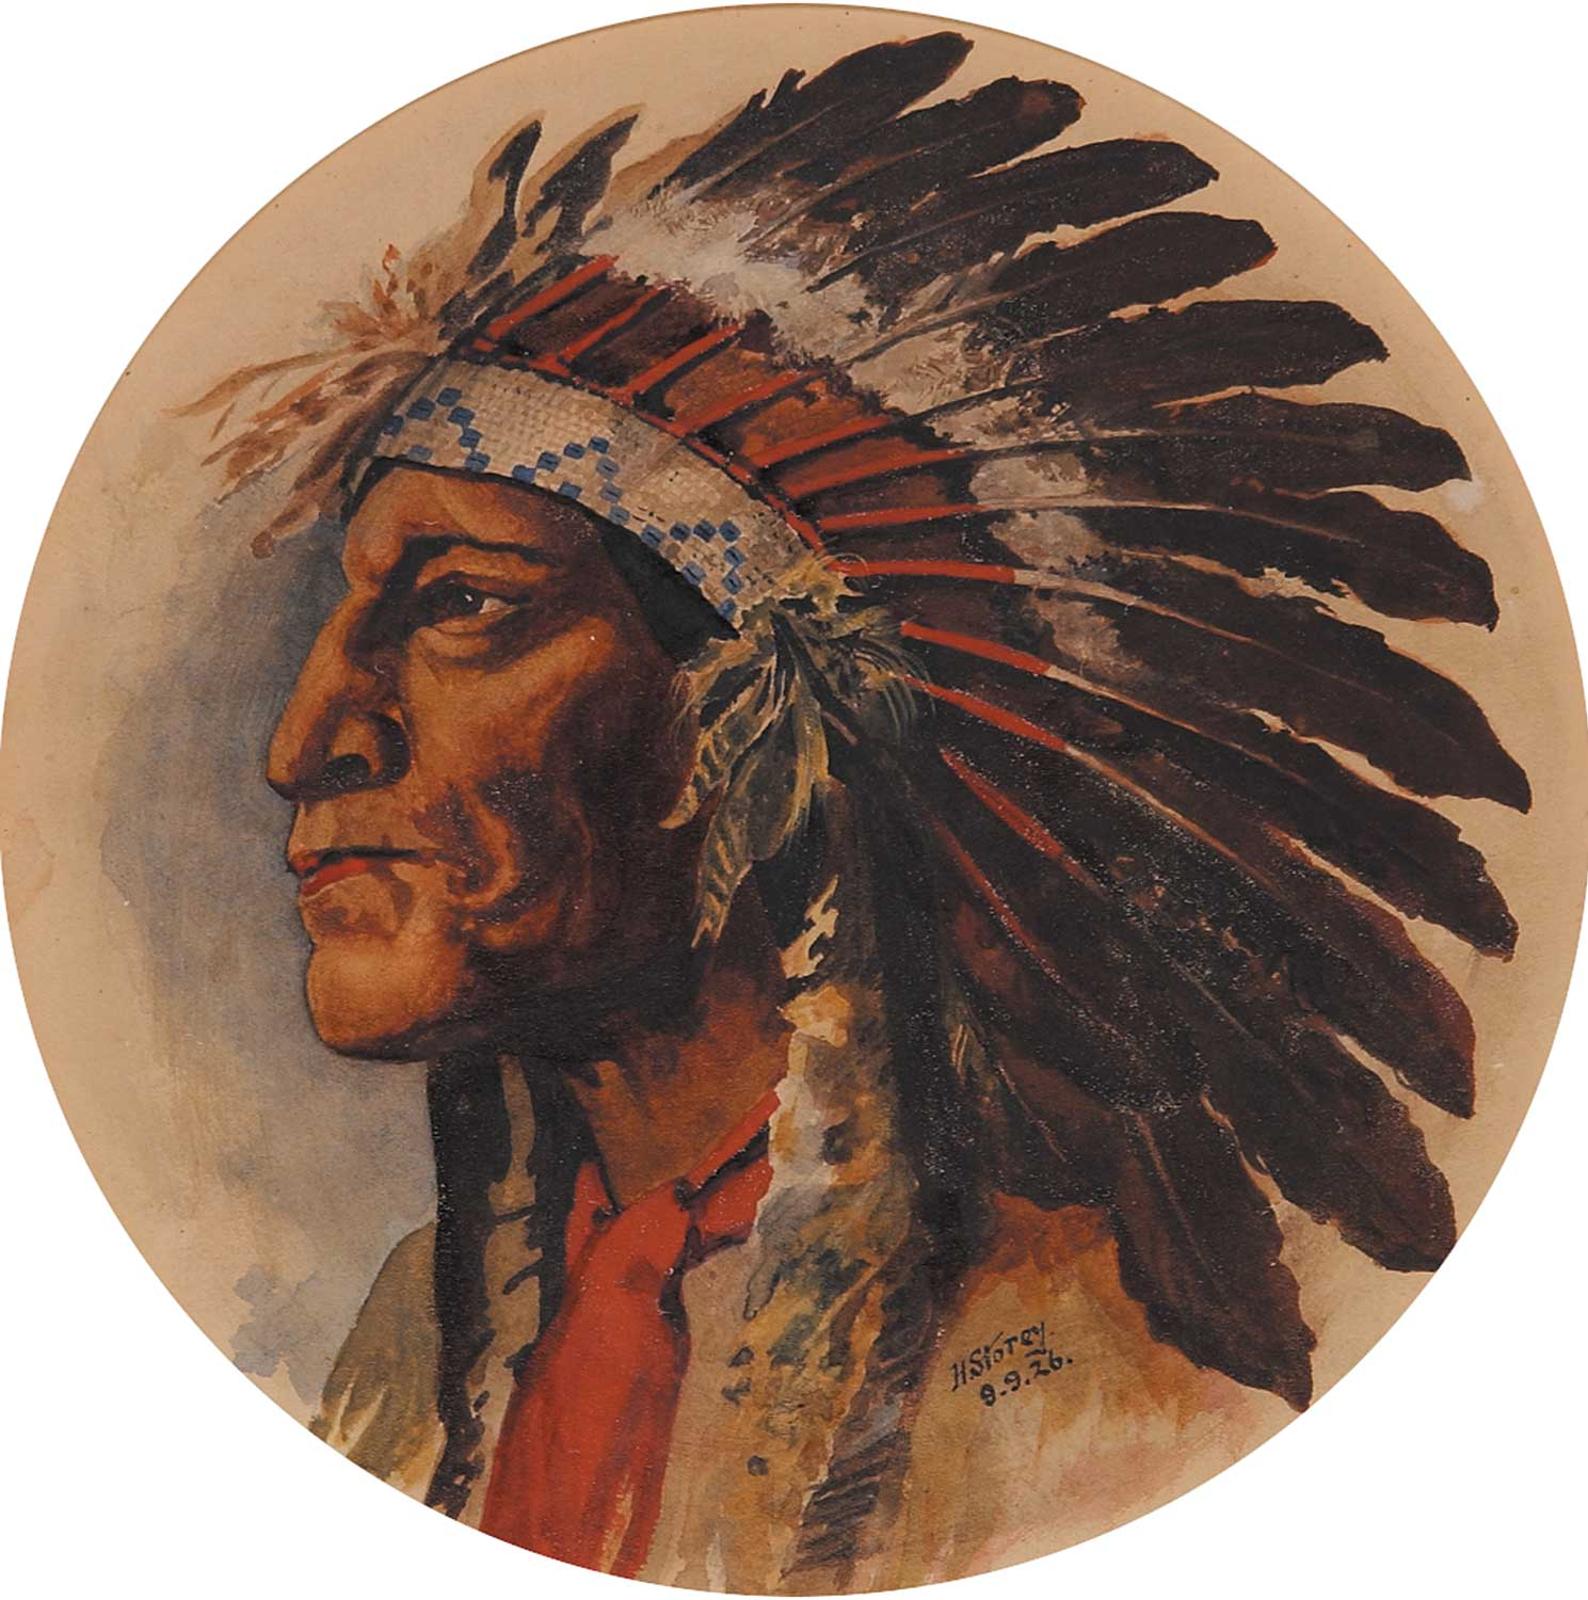 Helen Wood Storey - Untitled - The Indian Chief